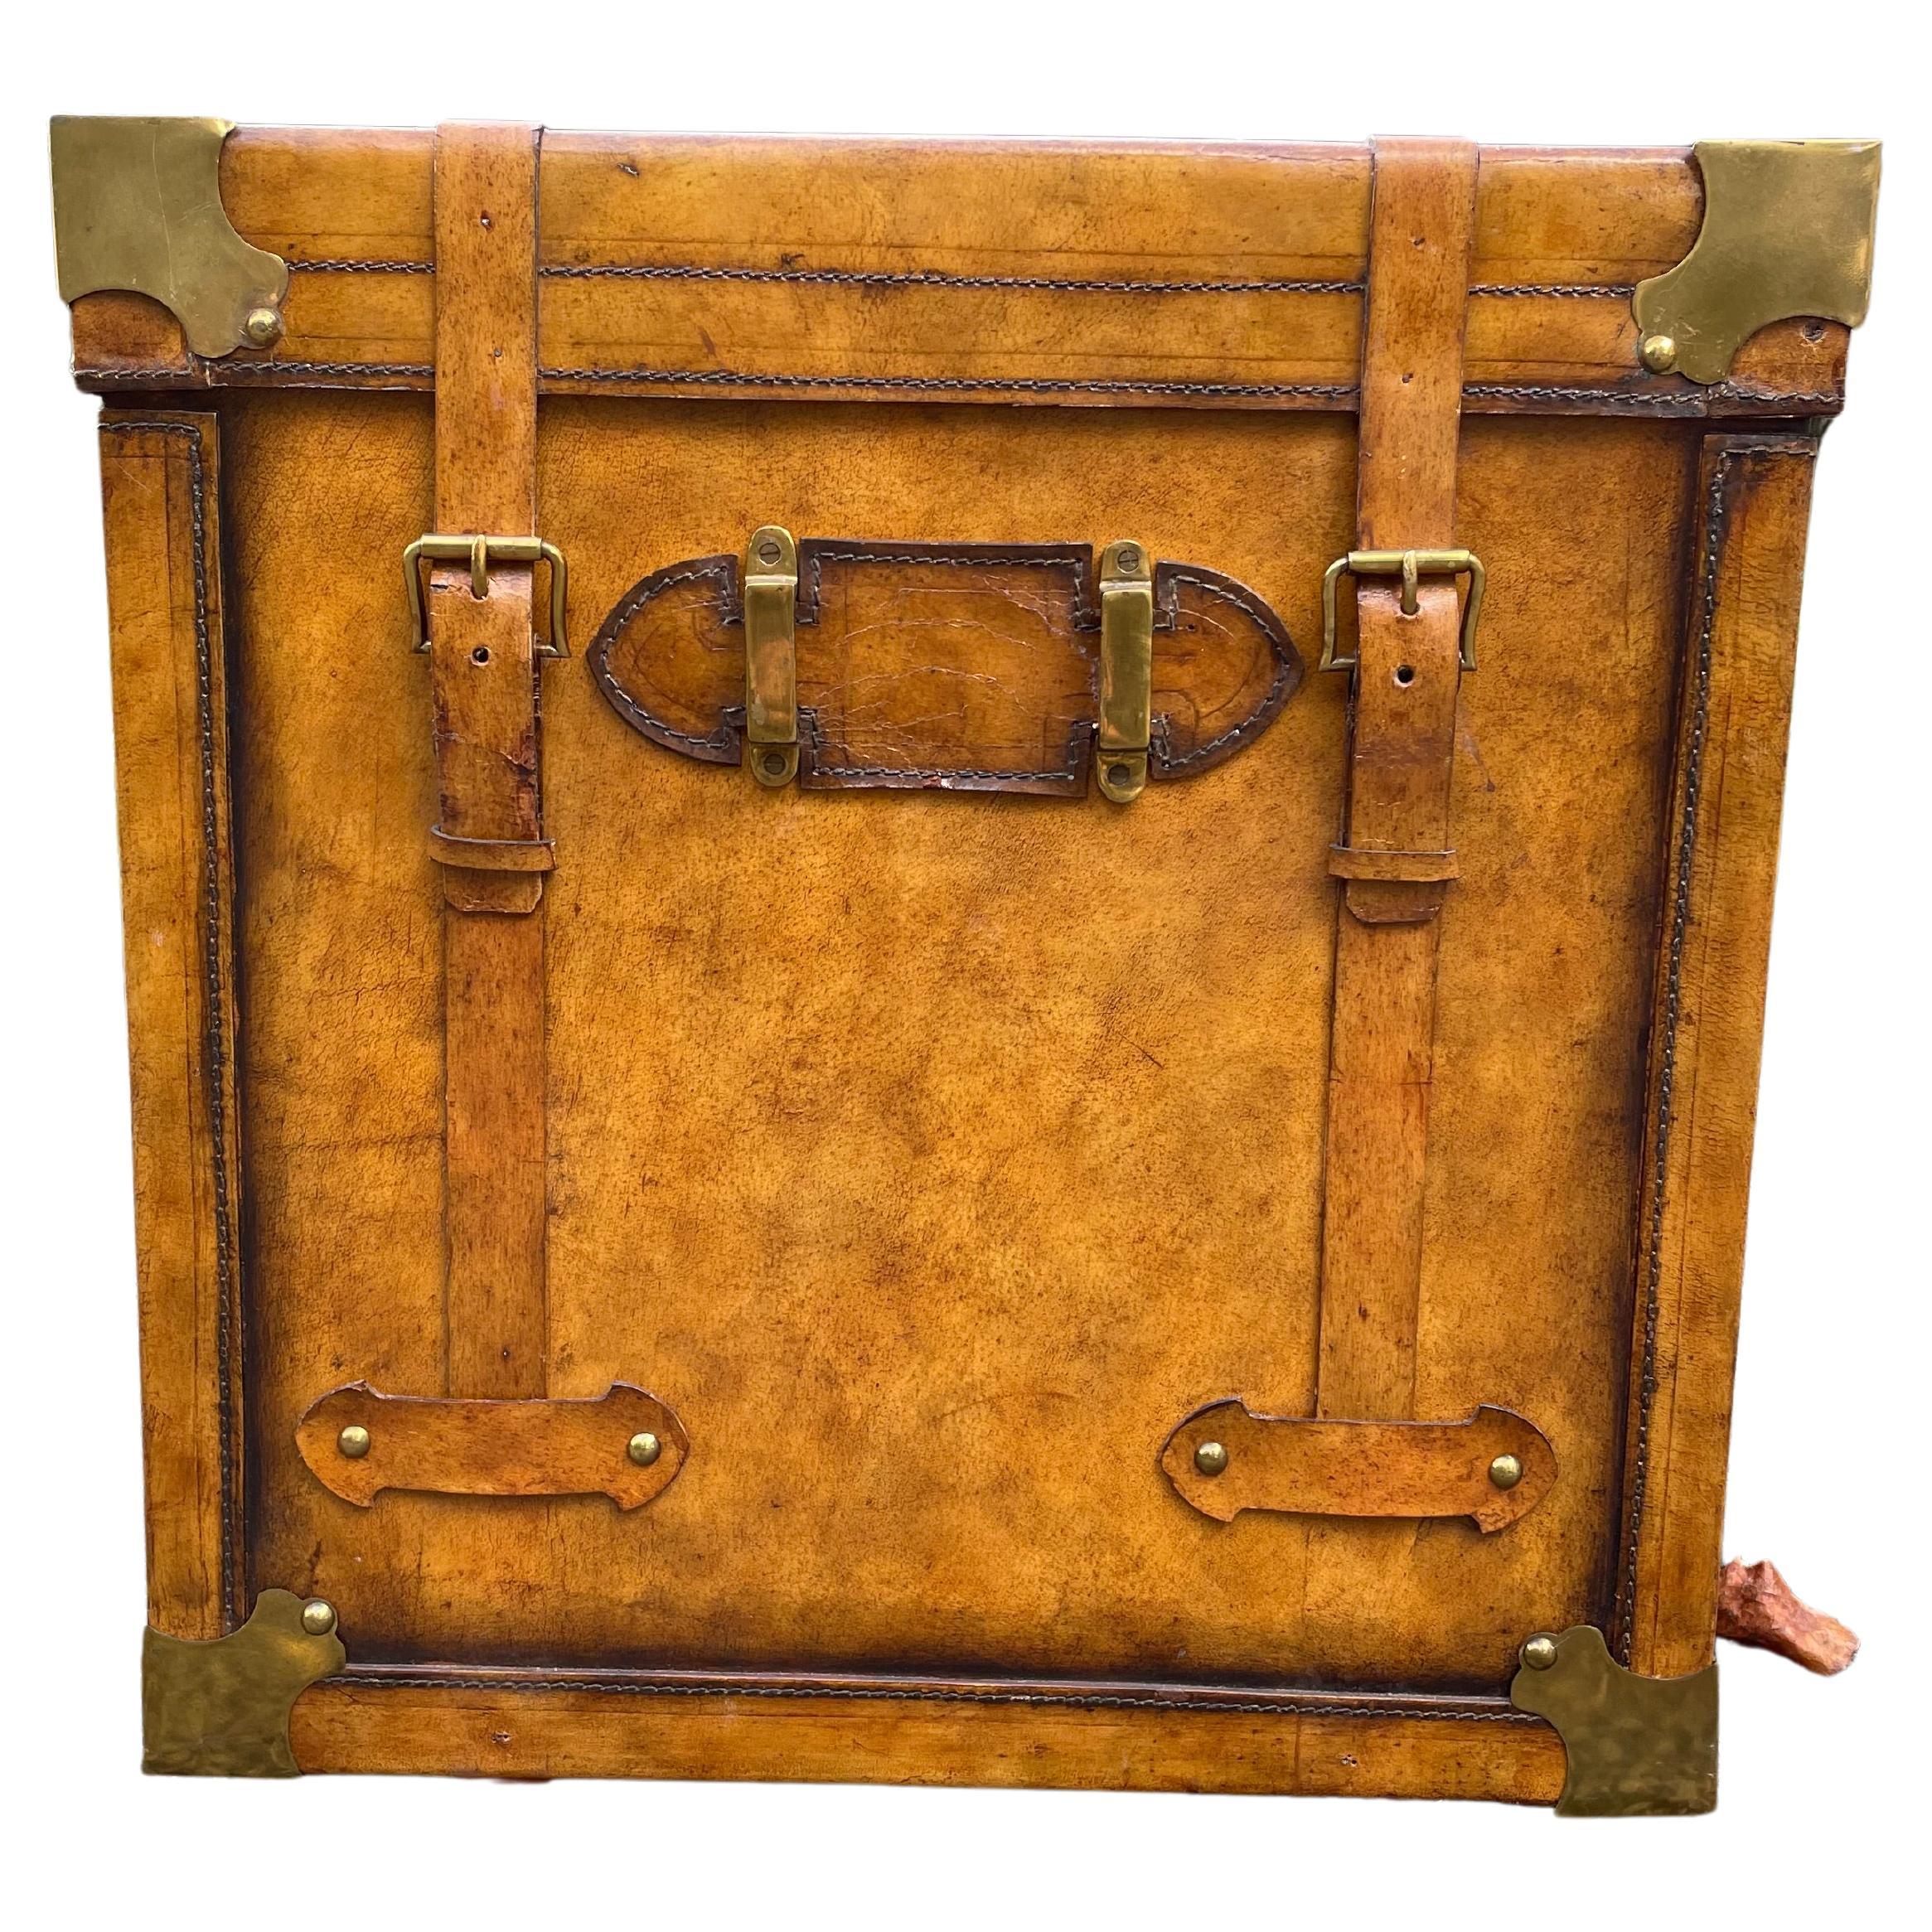 Handsome designer side table in the form of a leather trunk, having leather handles and straps, brass corners and knuckles. Note that the trunk doesn't open.